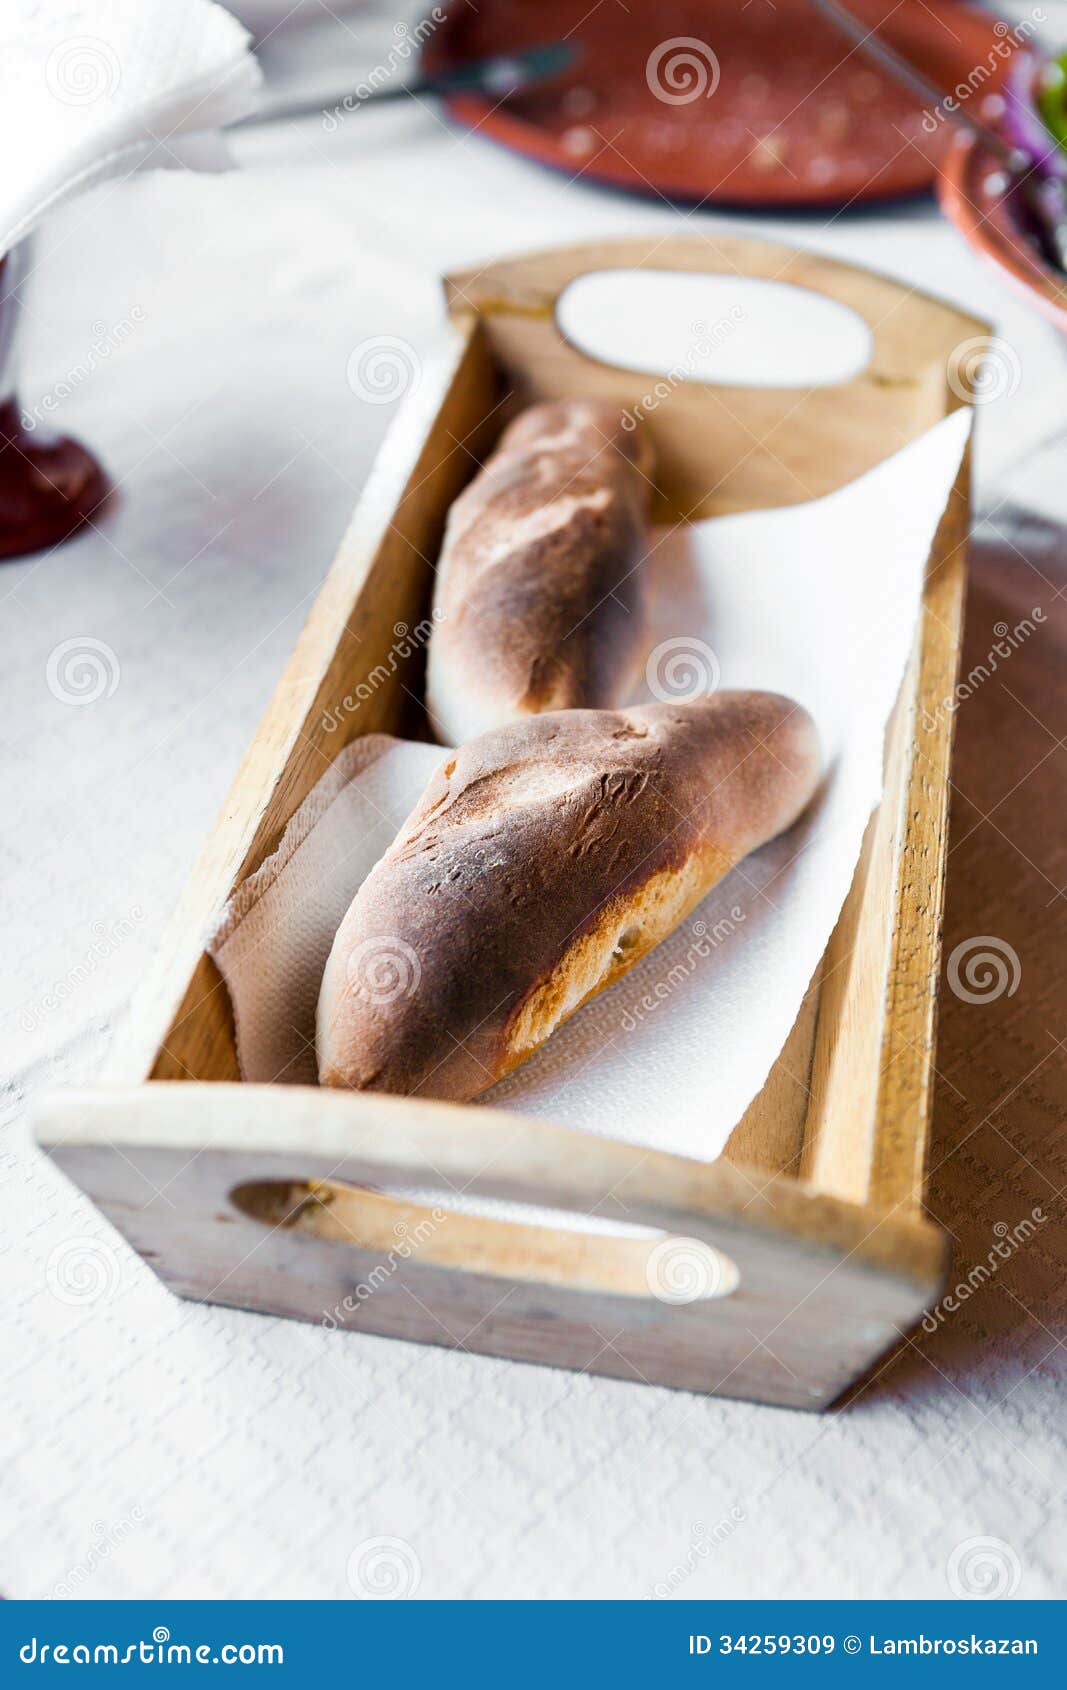 Fresh Delicious Hot Bread stock image. Image of backgrounds - 34259309